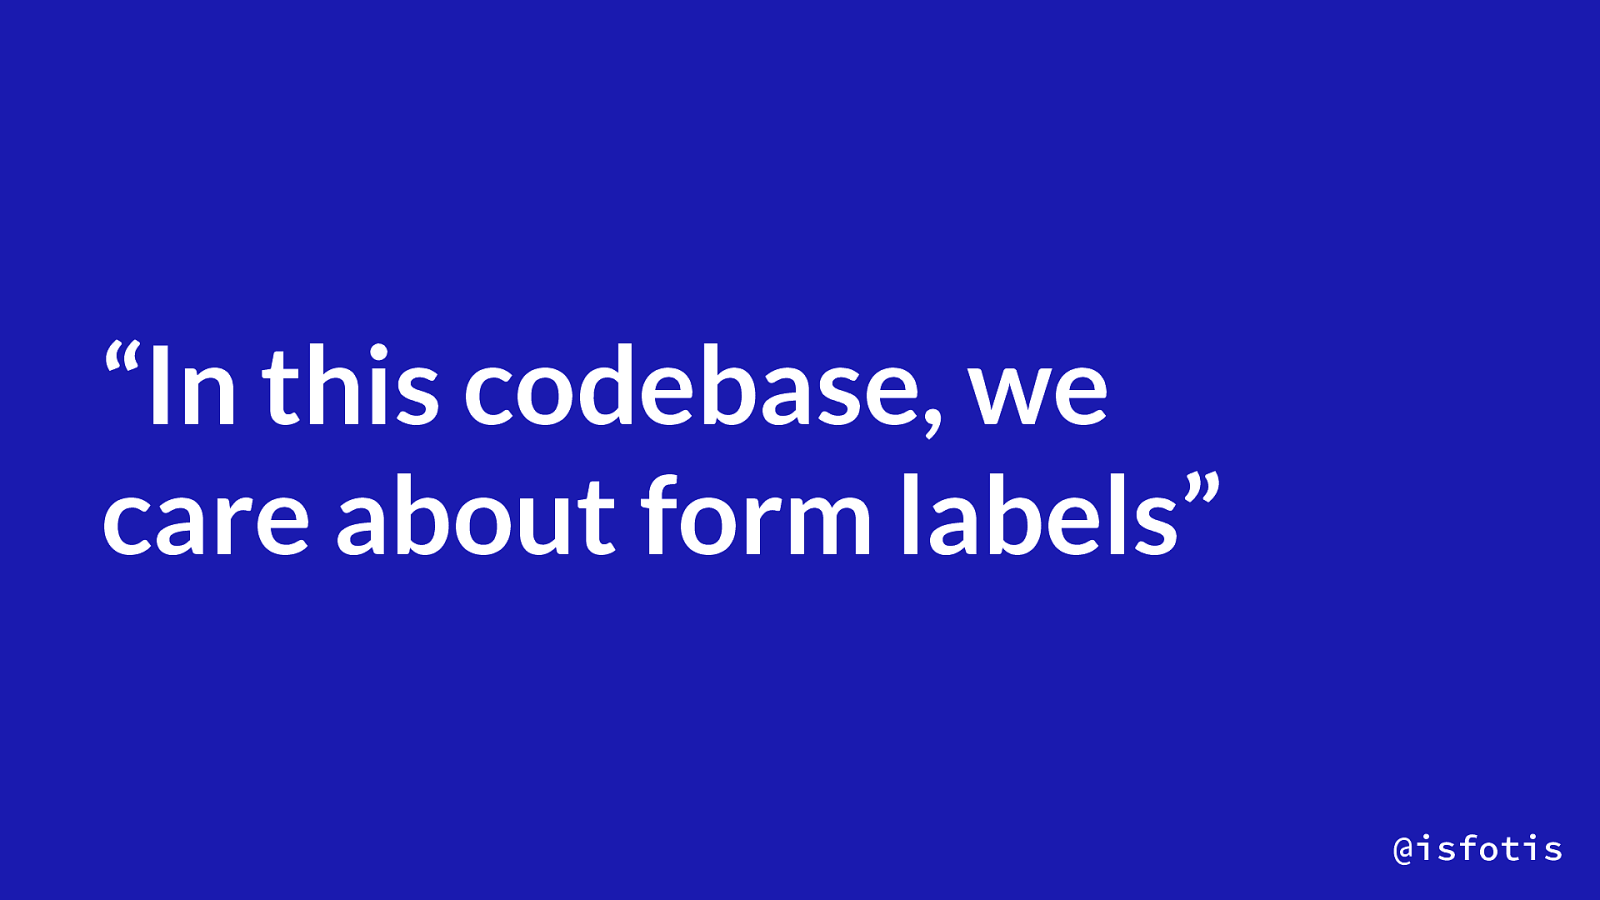 In this codebase, we care about labels